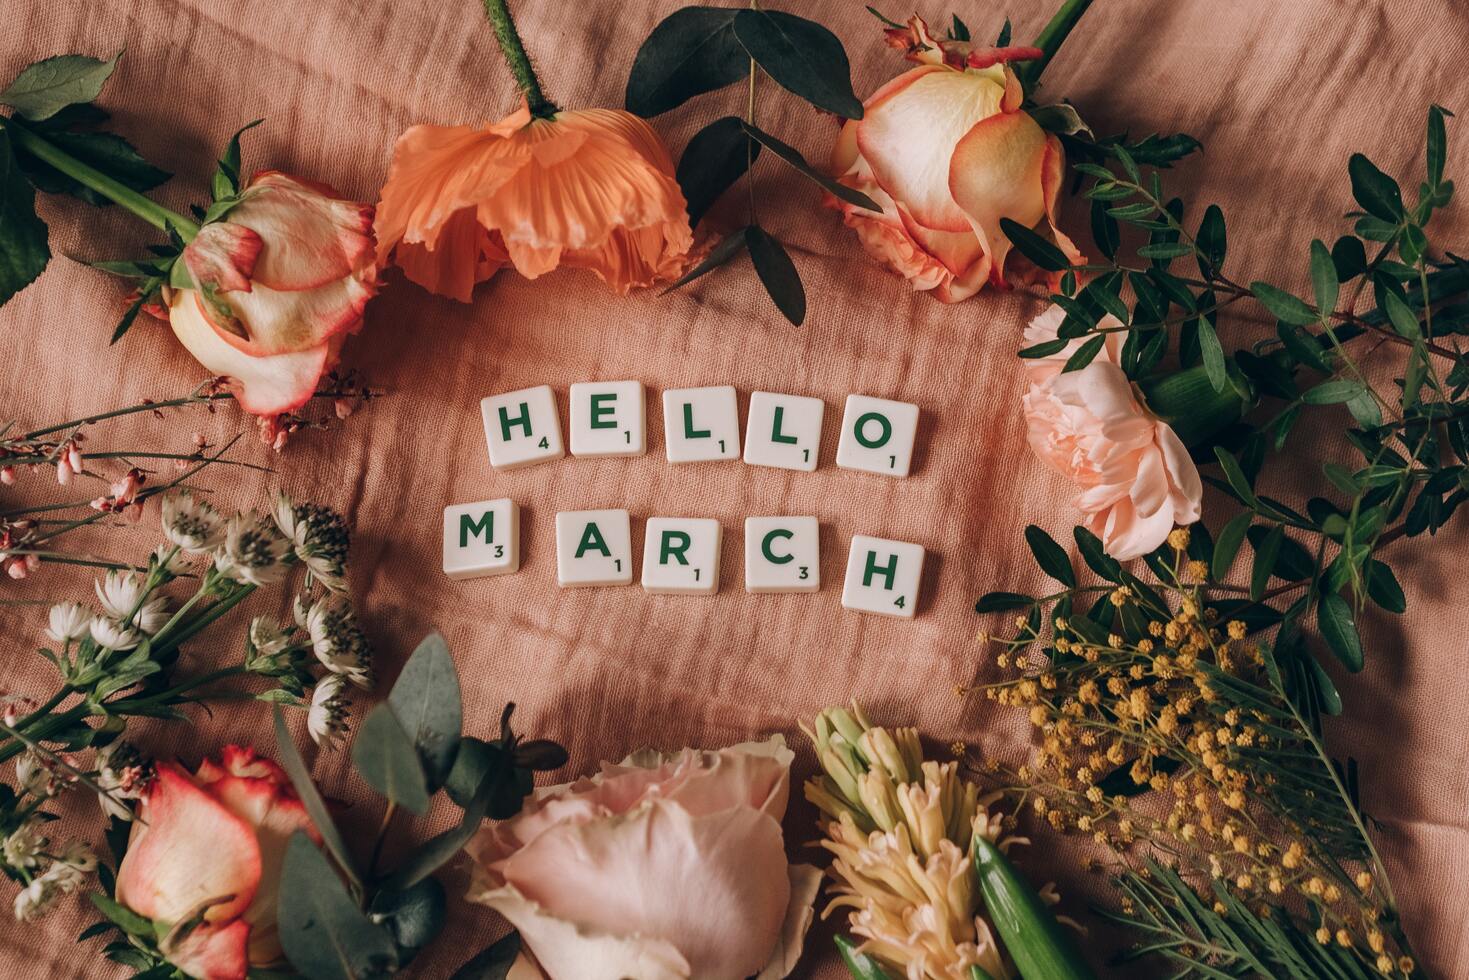 march affirmations